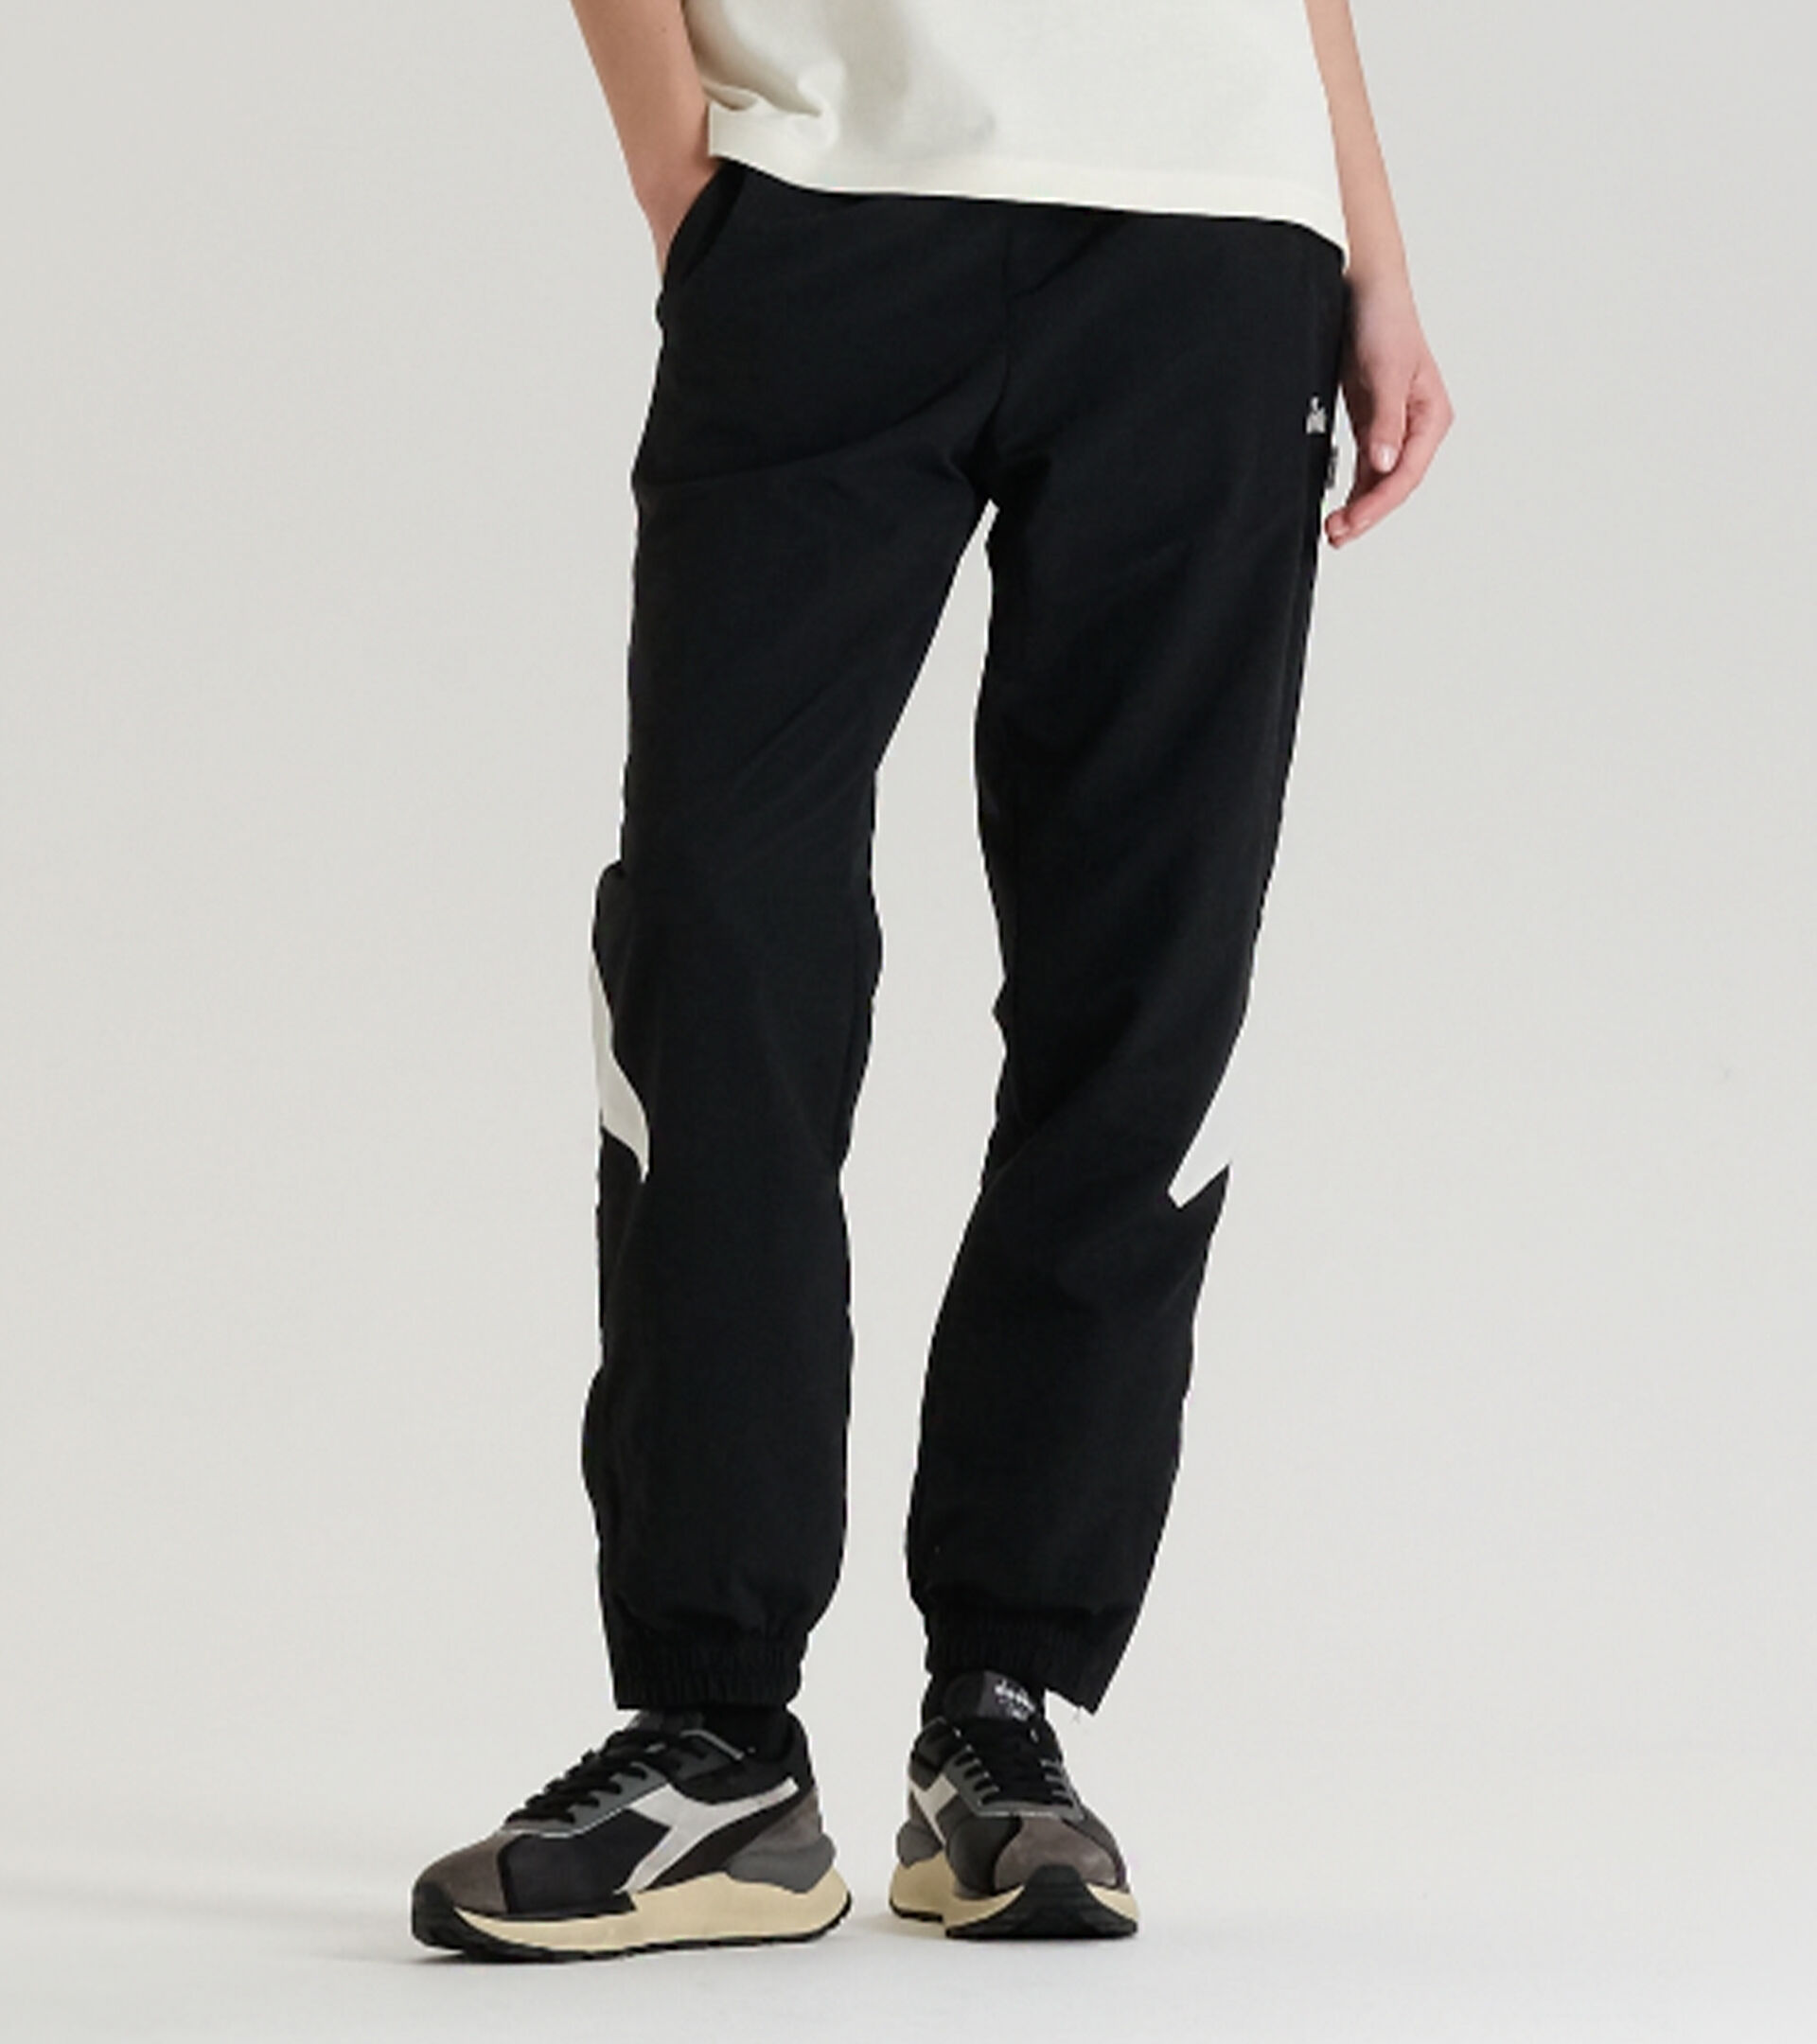 Sporthose - made in Italy - genderneutral TRACK PANTS LEGACY SCHWARZ - Diadora